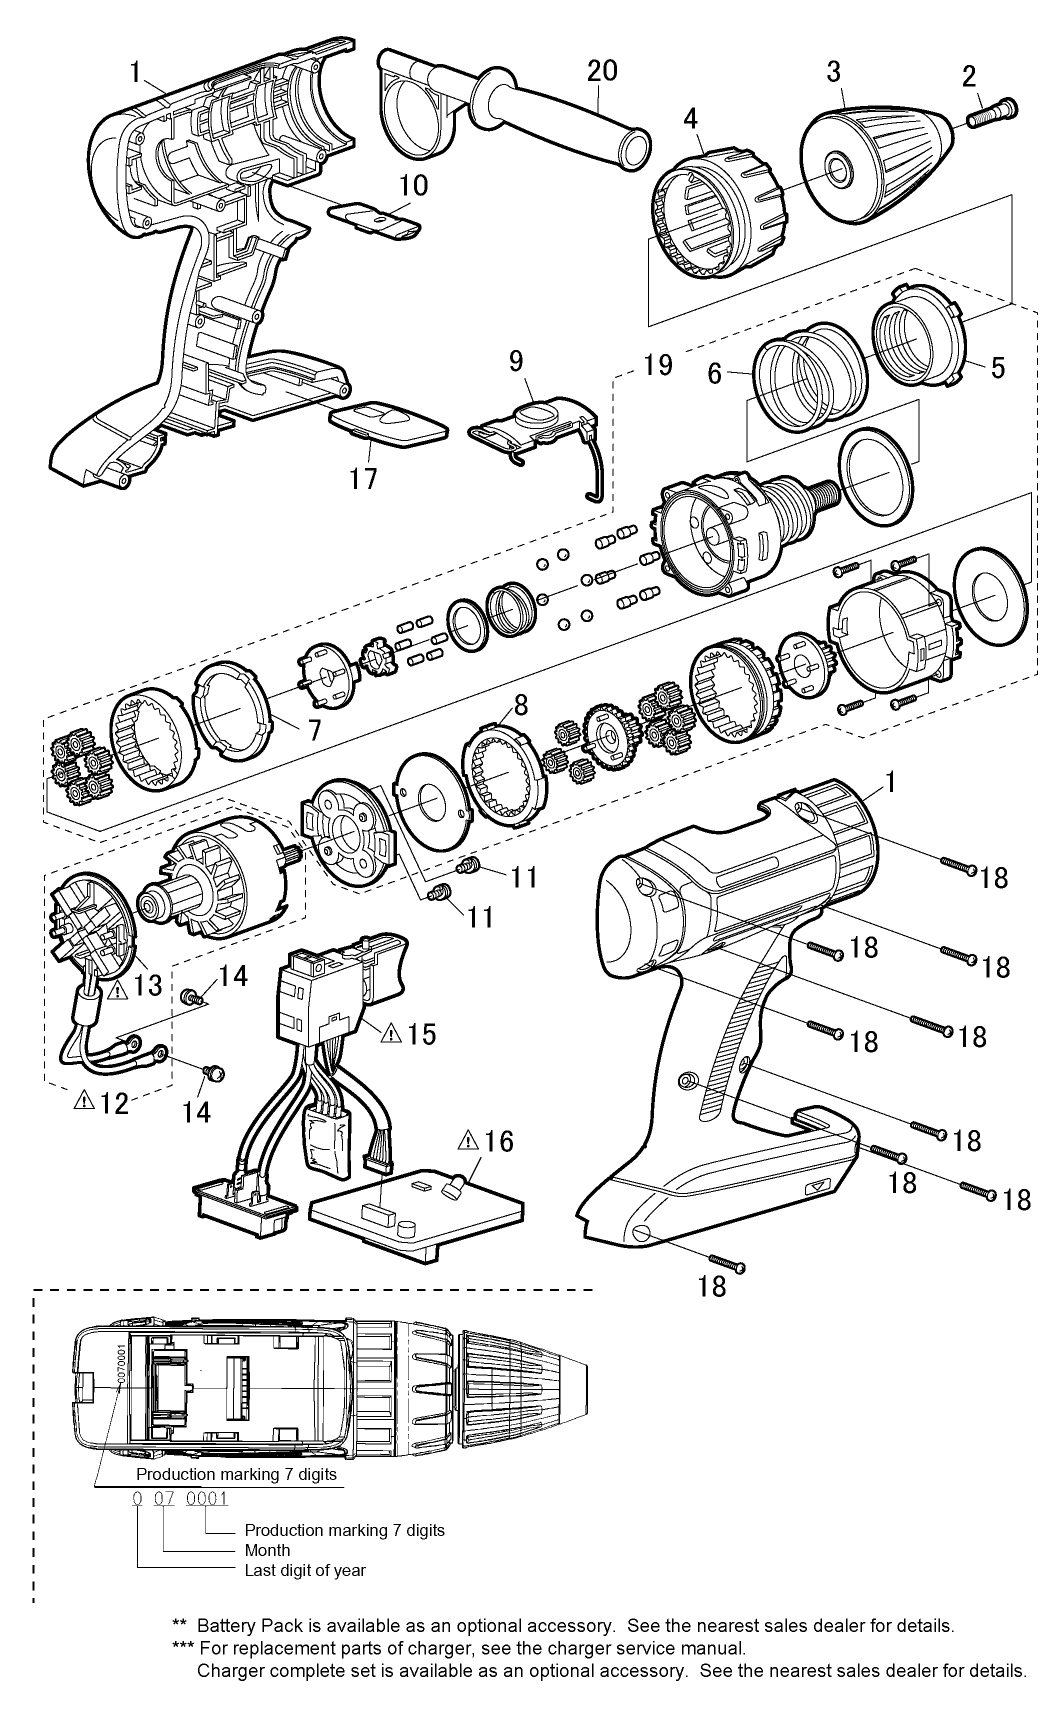 EY7450: Exploded View